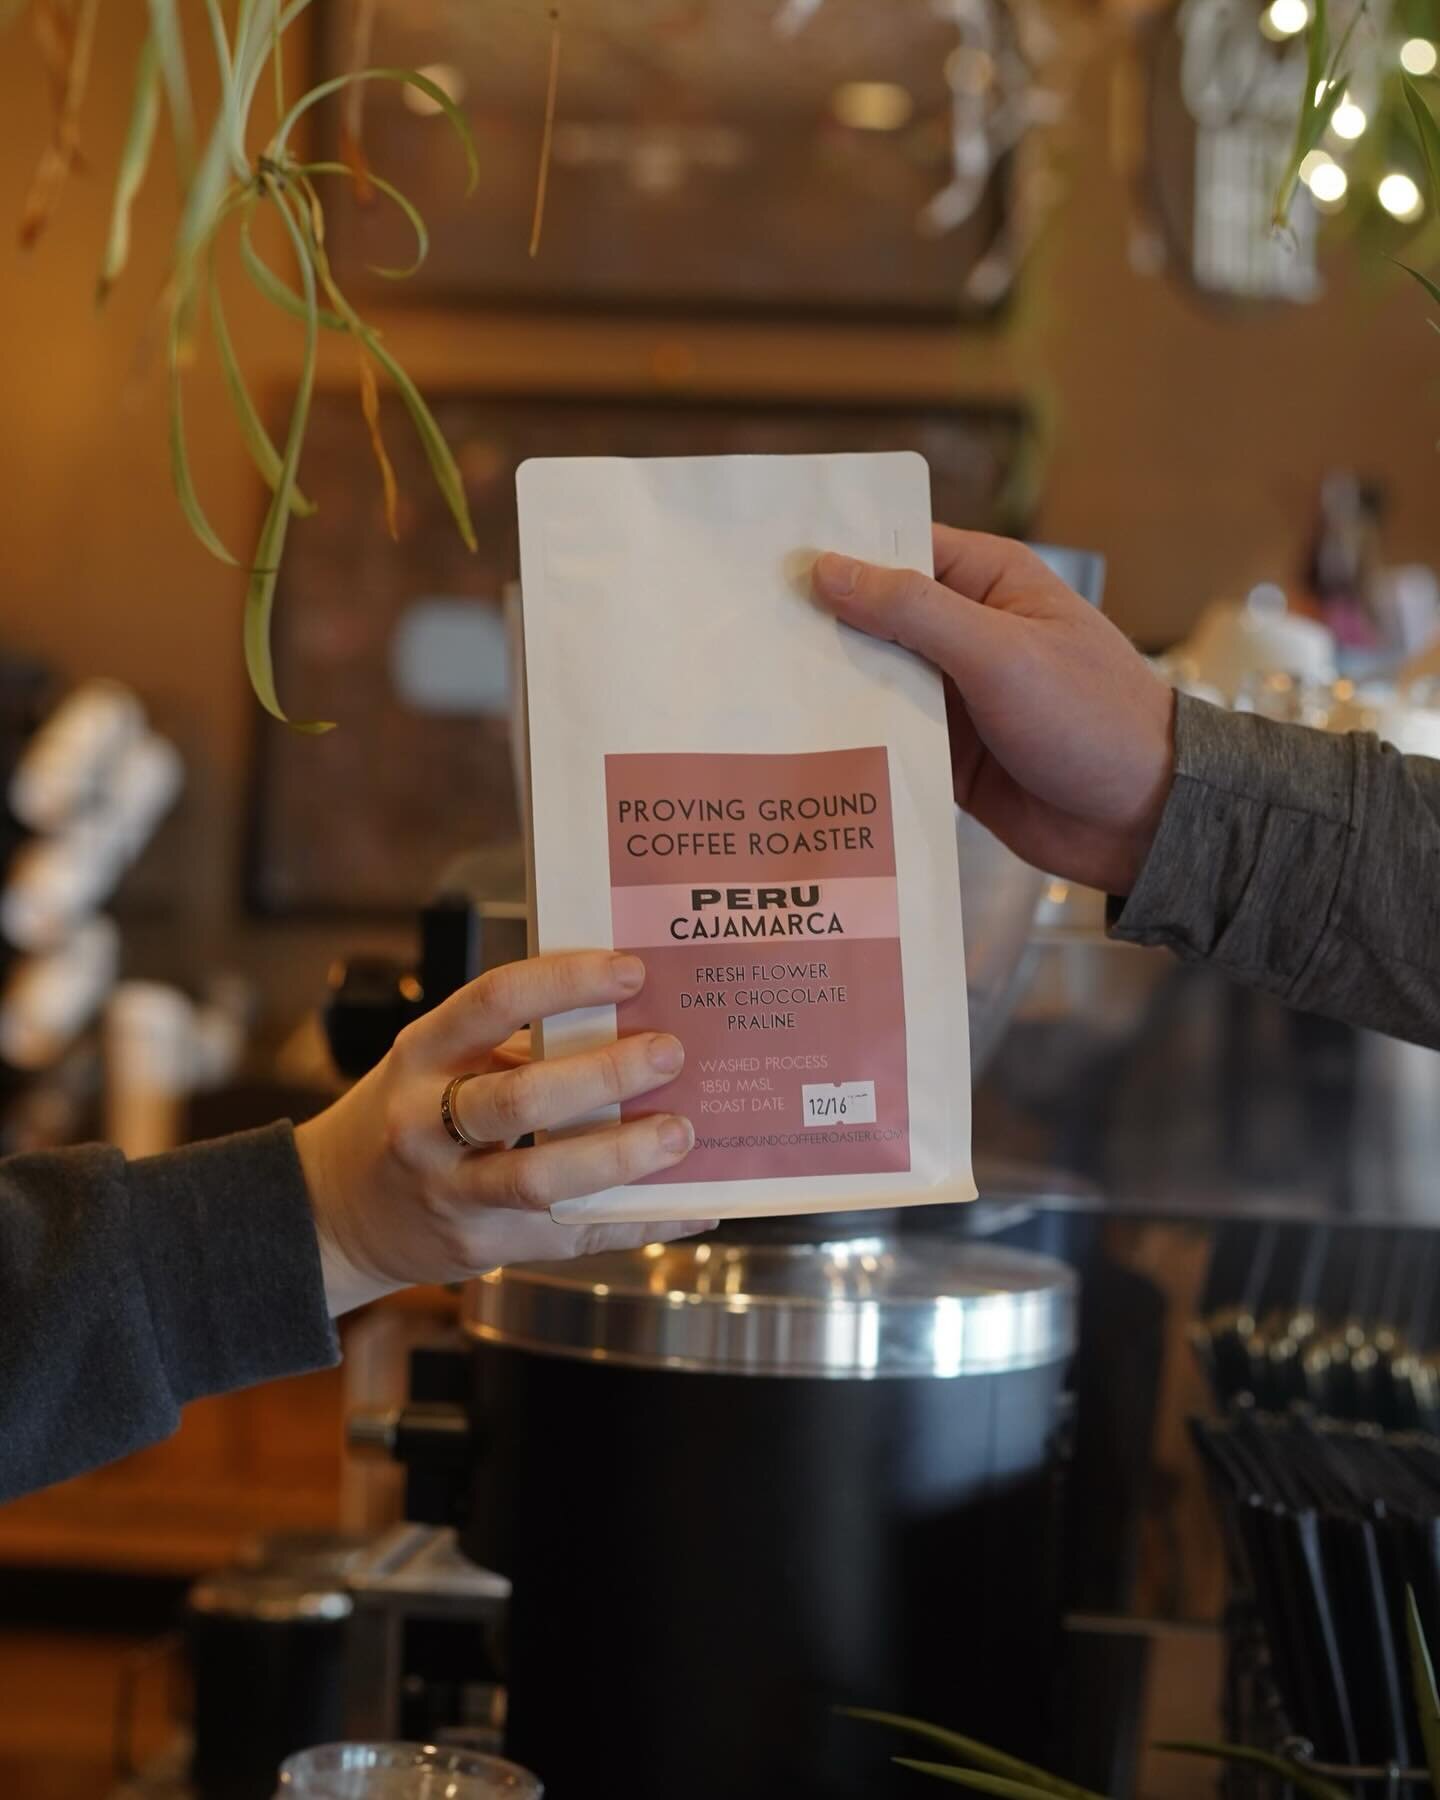 Peru - Cajamarca 

A single origin with a candy like sweetness, grown in a semi-dry, semi-cold, tropical highland of Peru with very fertile soil at high Andean mountain elevations. 

Come in a grab a few bags before they&rsquo;re gone! 

#provinggrou